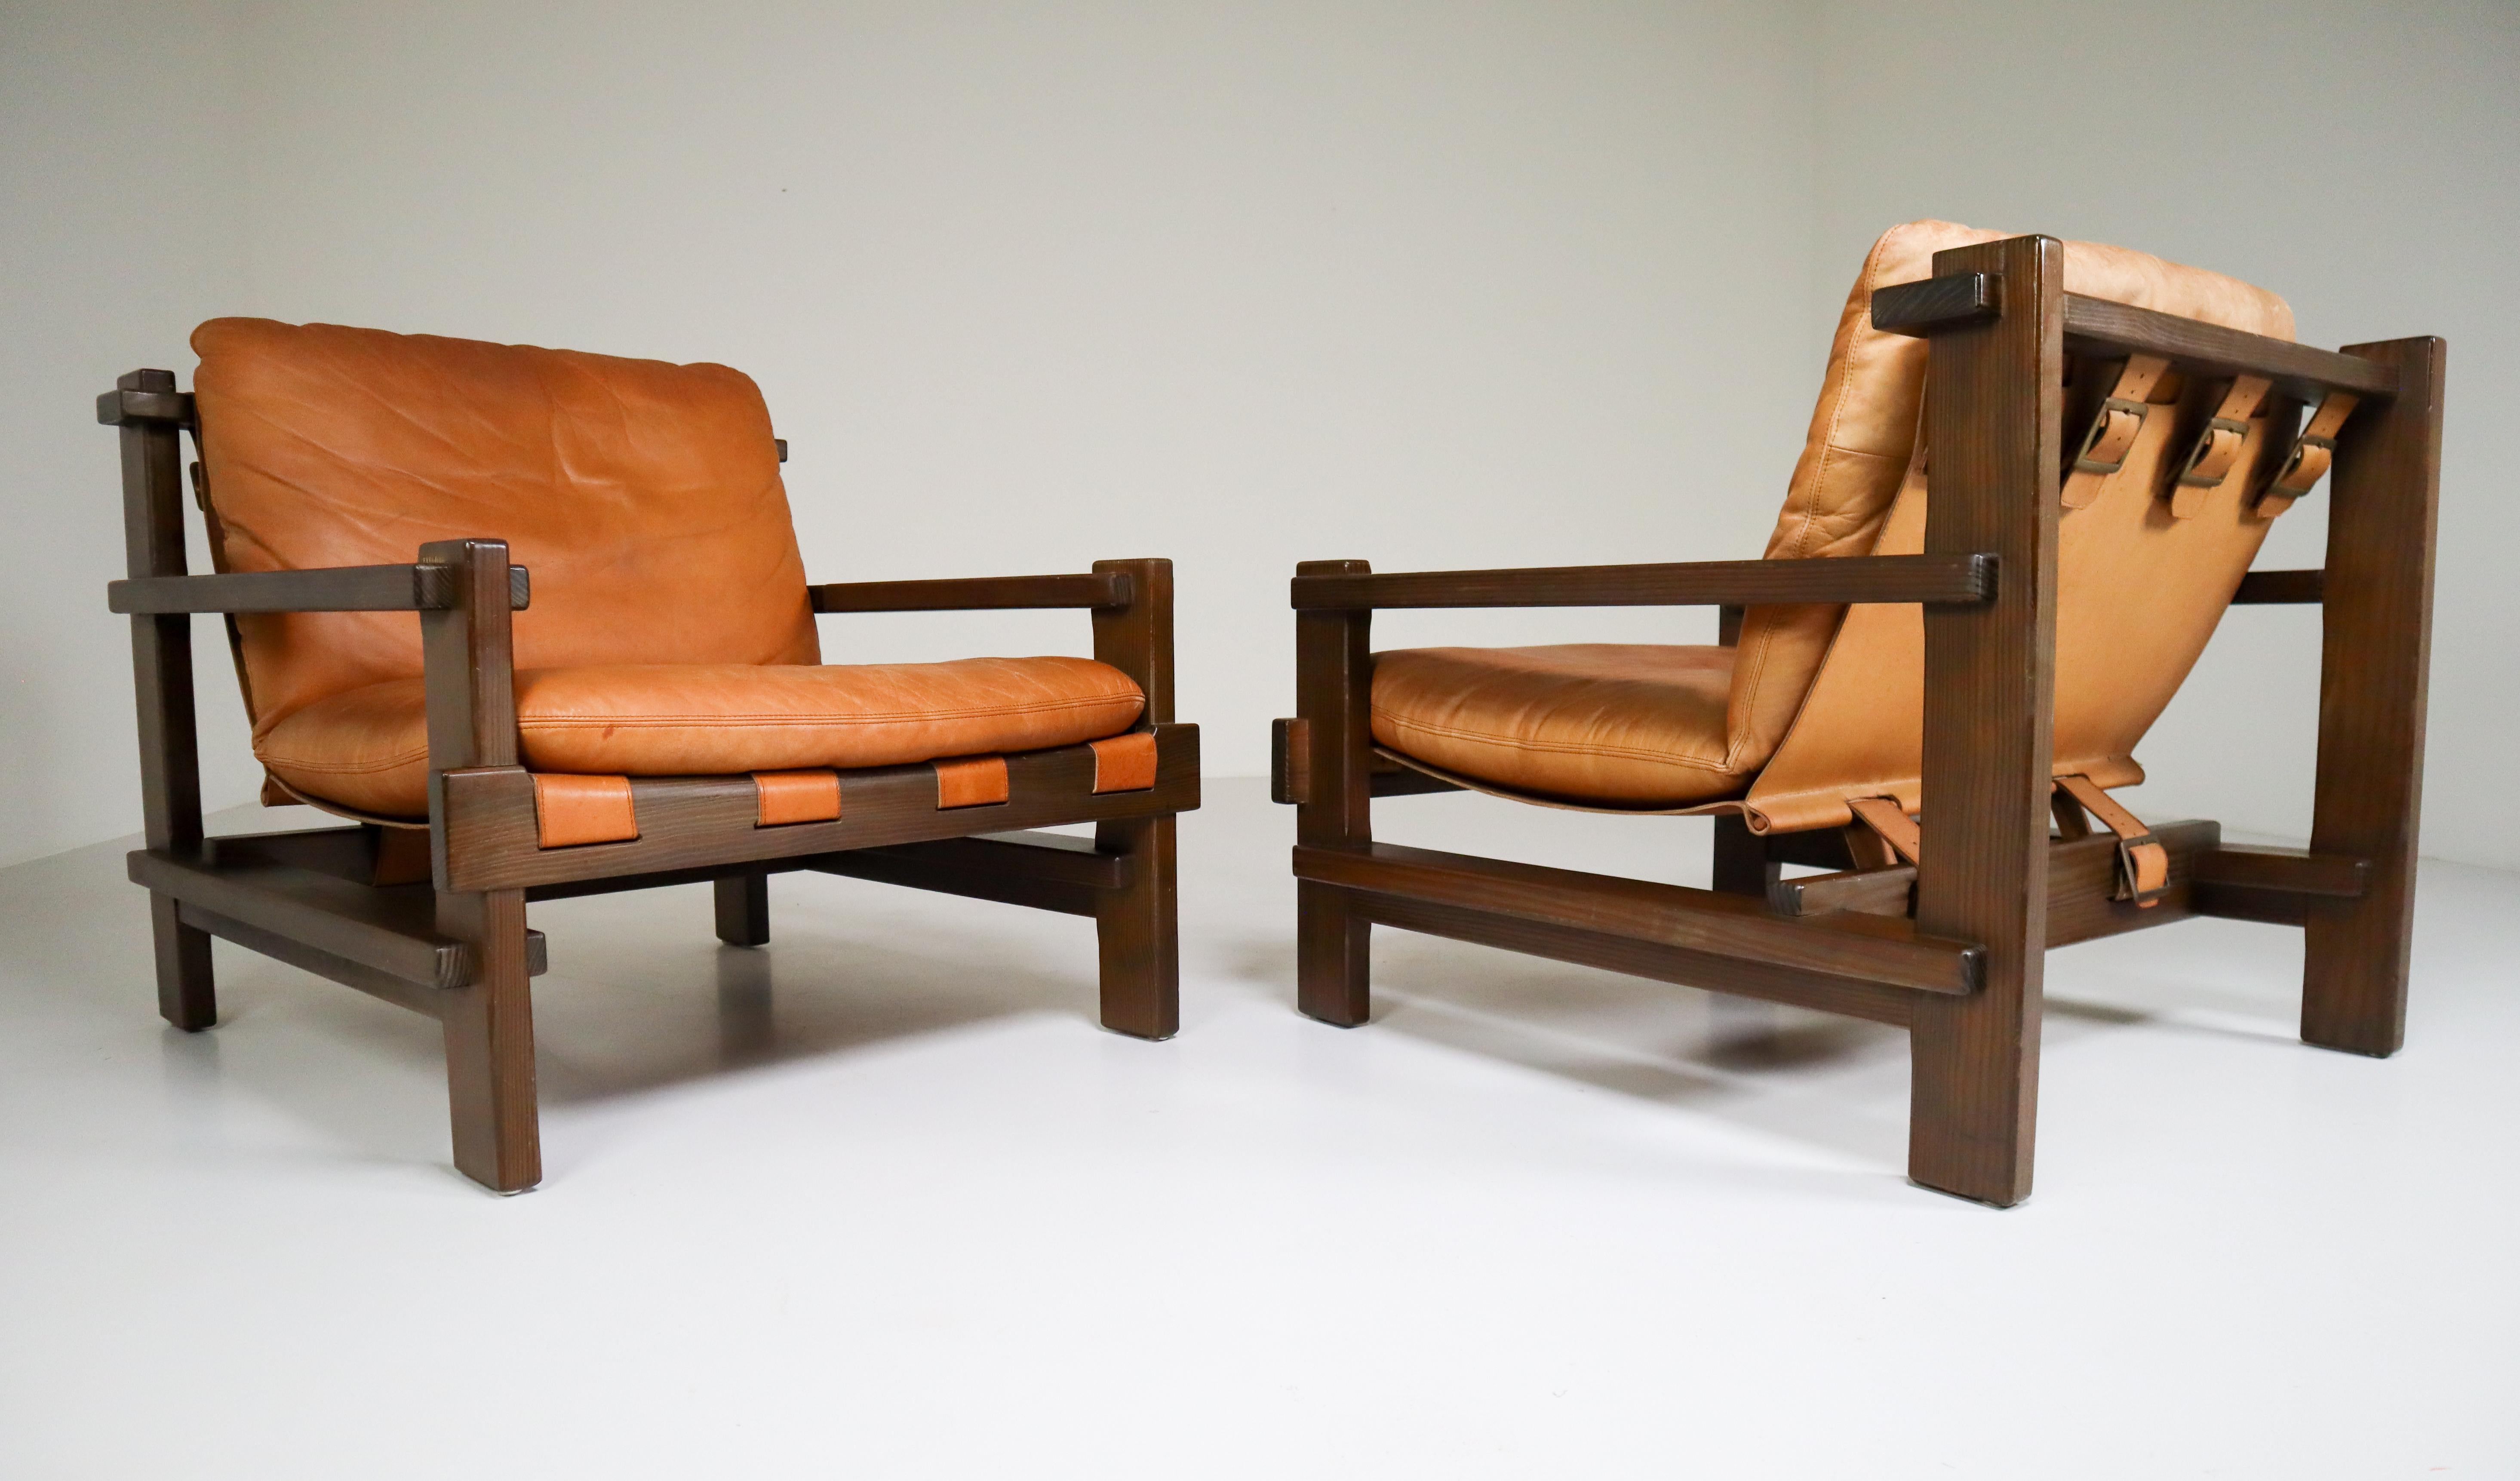 Pair of lounge chairs by Carl Straub in absolutely gorgeous cognac leather and solid pinewood, circa 1960s. The the soft leather is beautifully patinated during use and age and. Altogether a lovely set that not only attracts attention by its well